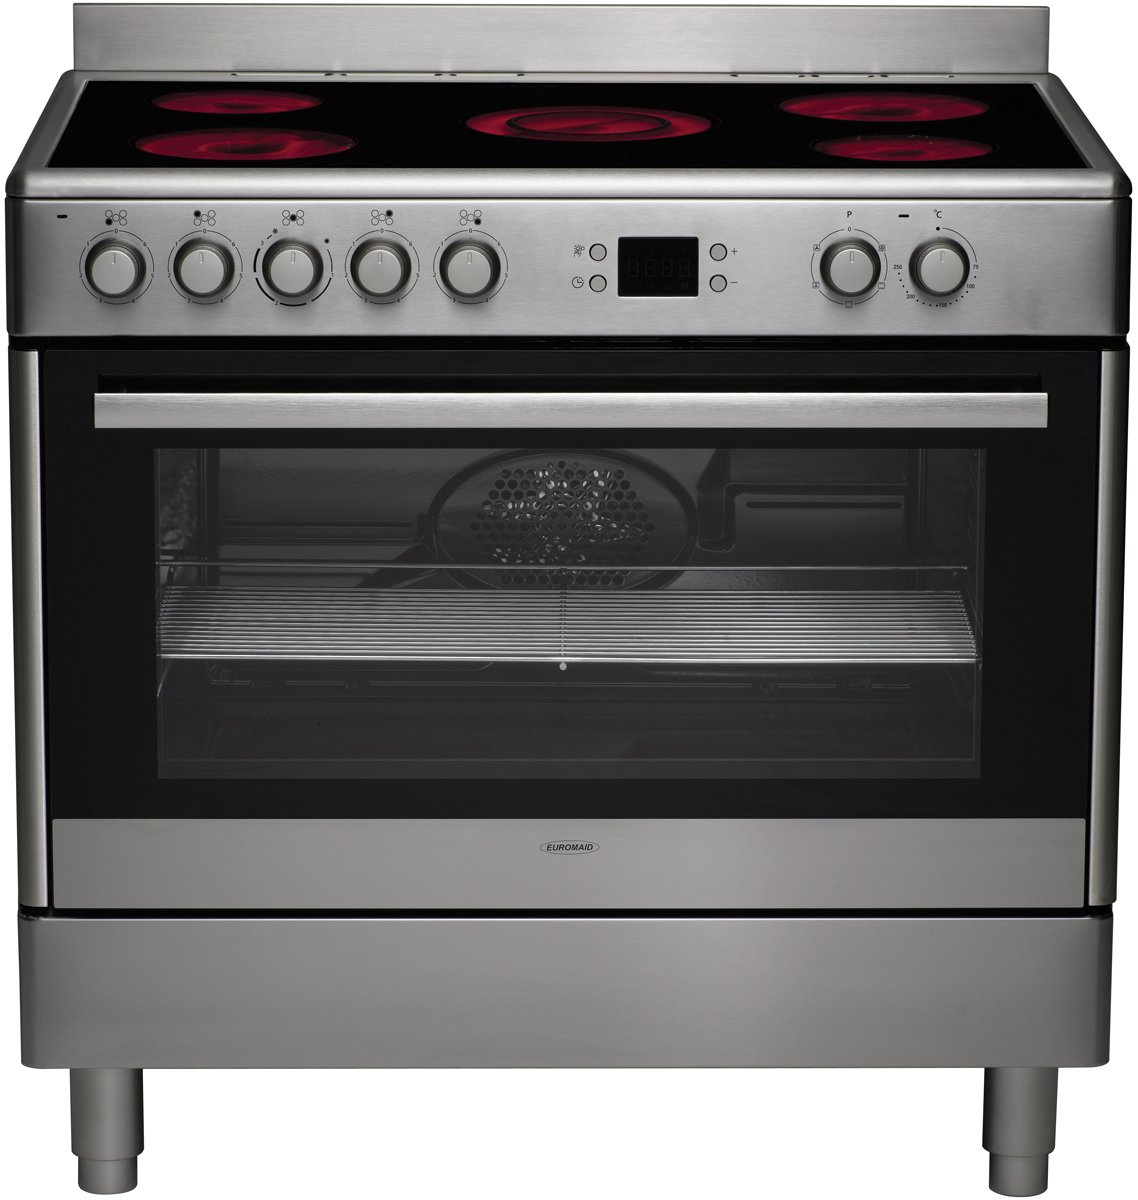 90cm Freestanding Electric Oven/Stove 